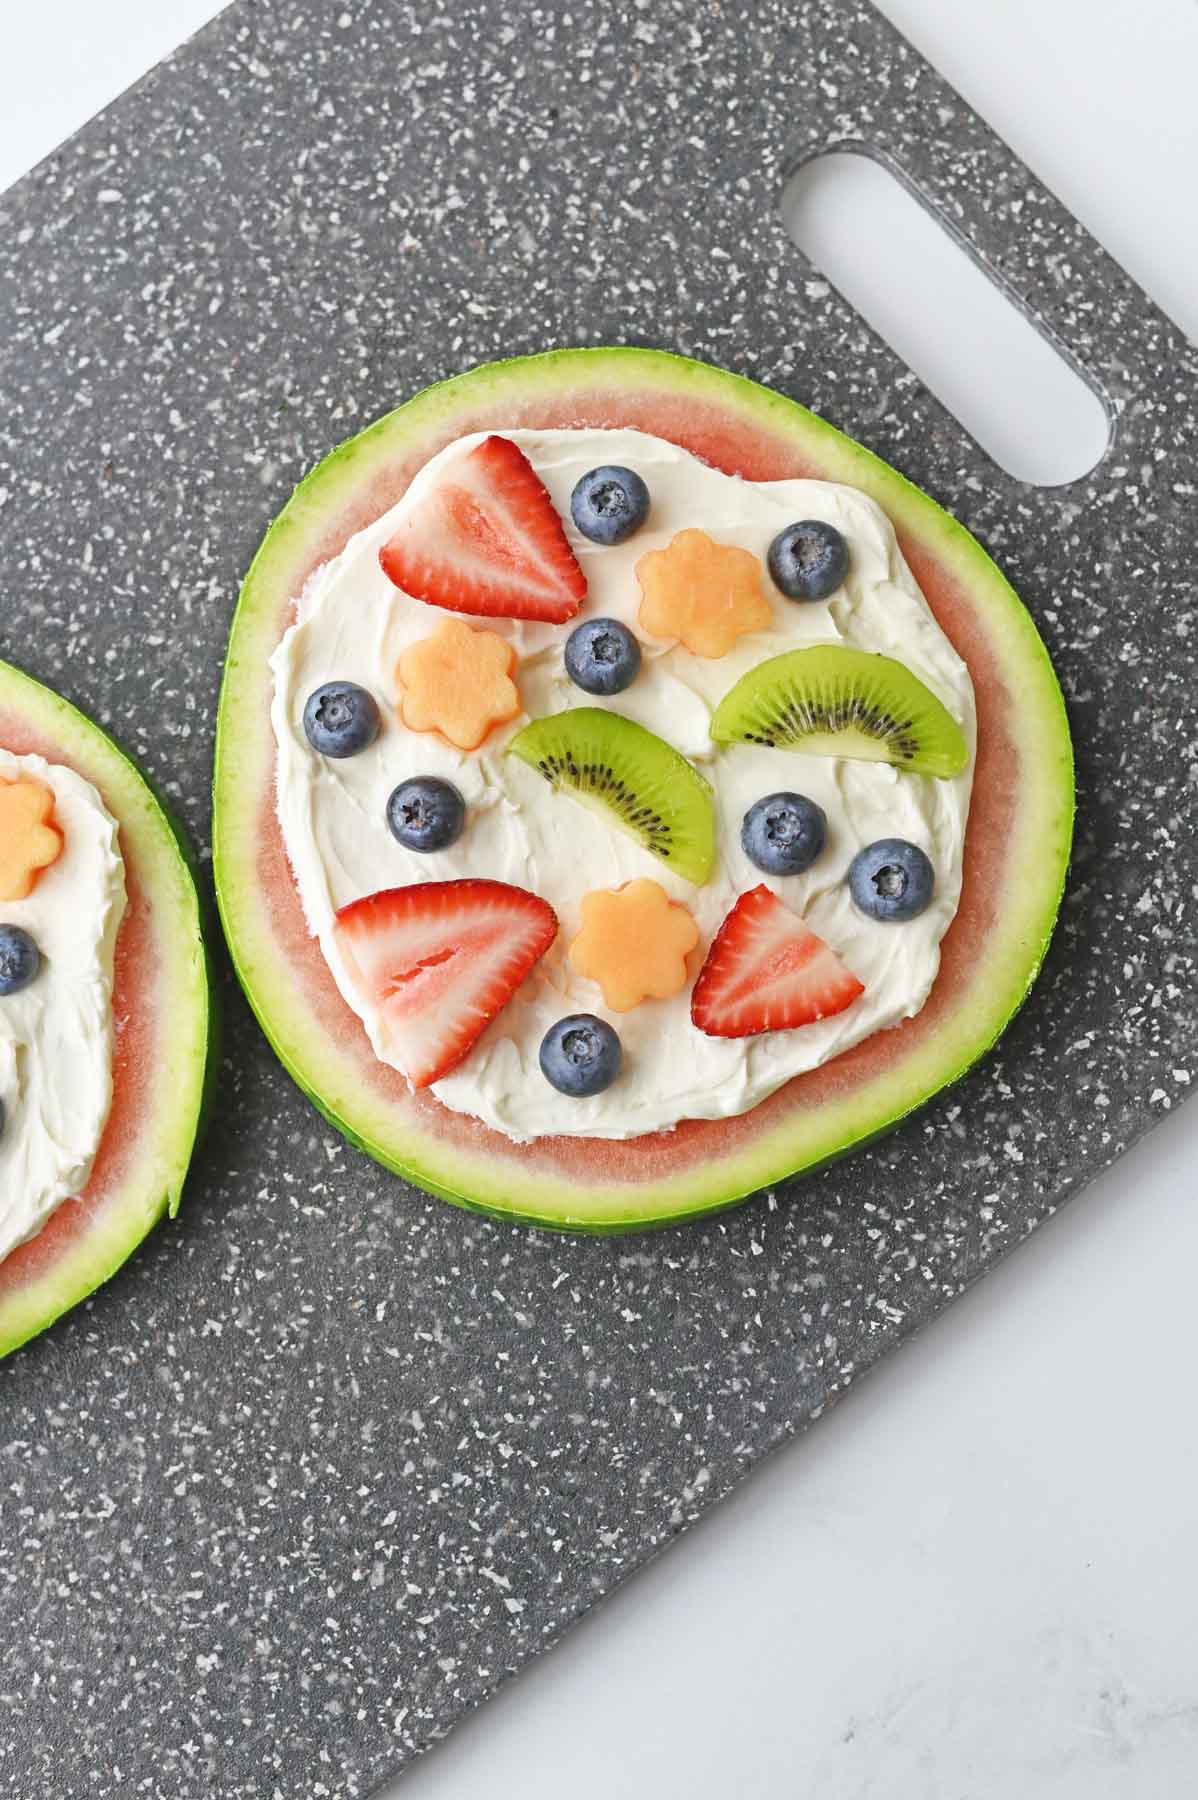 slice of watermelon with frosting and fruit